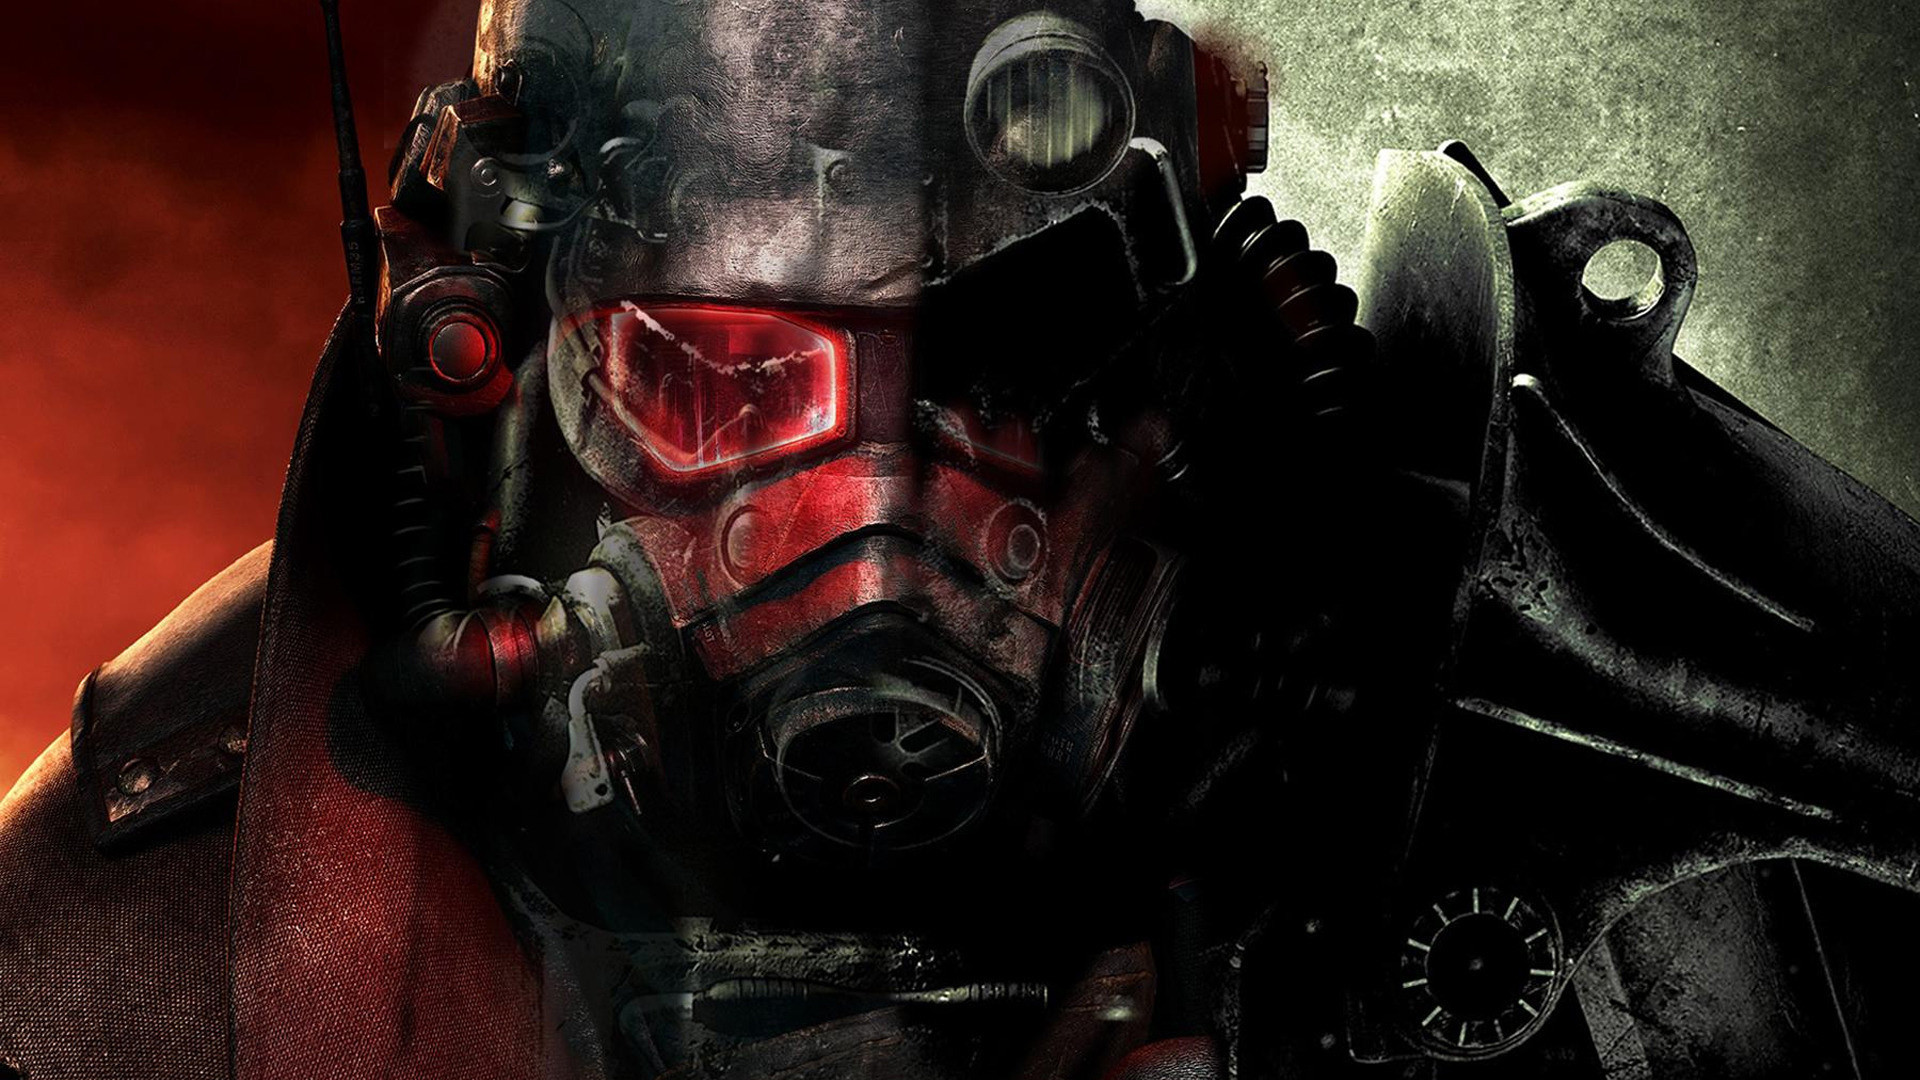 1920x1080 on September 29, 2015 By Stephen Comments Off on Fallout 4 Wallpaper .